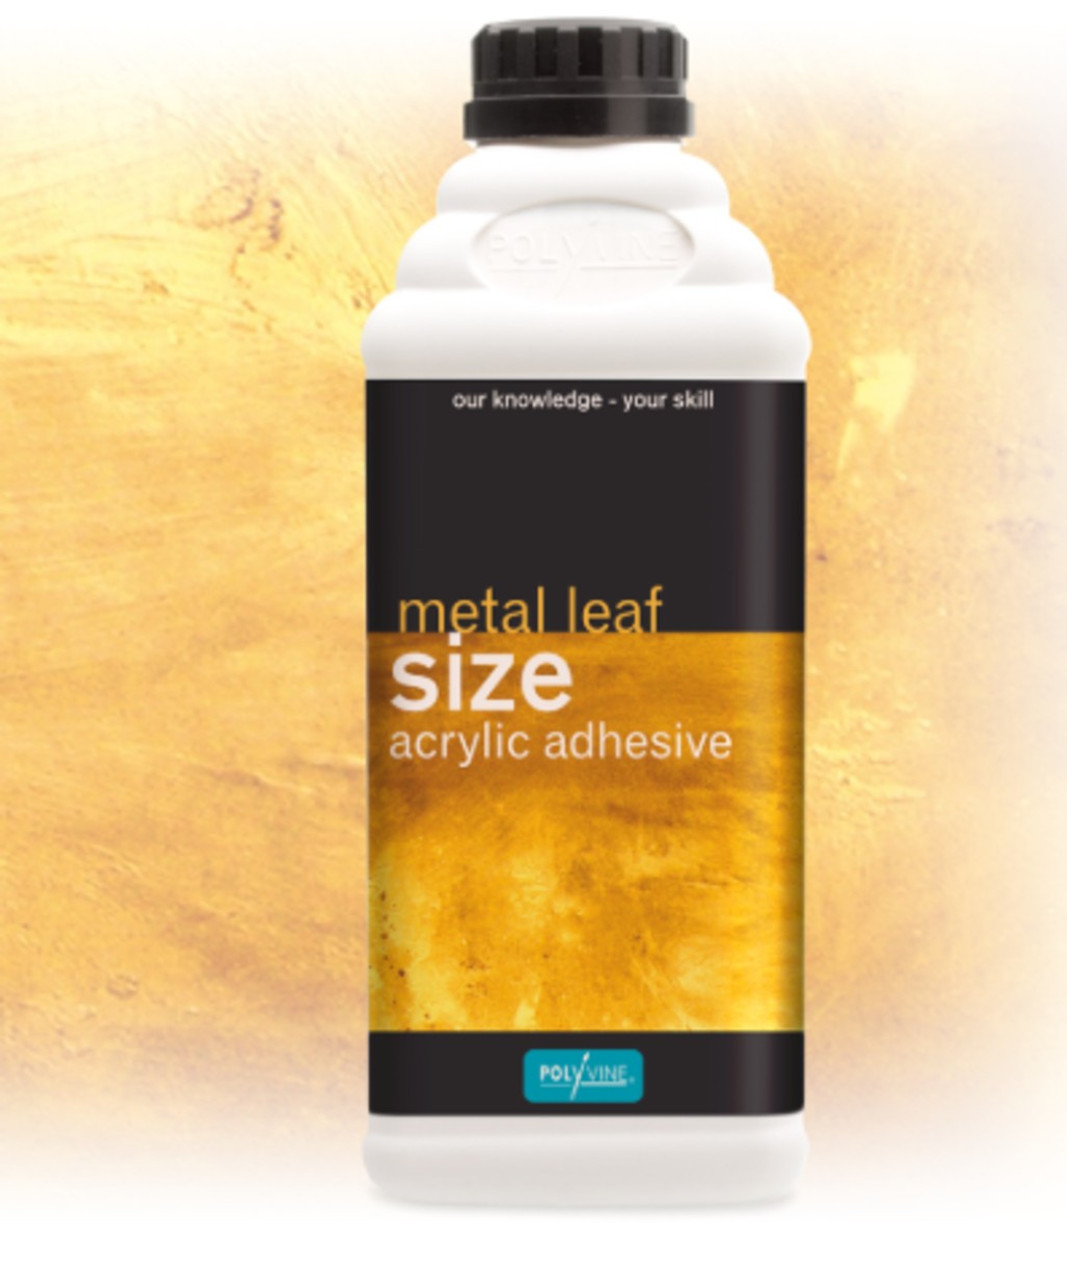 Polyvine Metal Leaf Size Acrylic Adhesive for Gilding